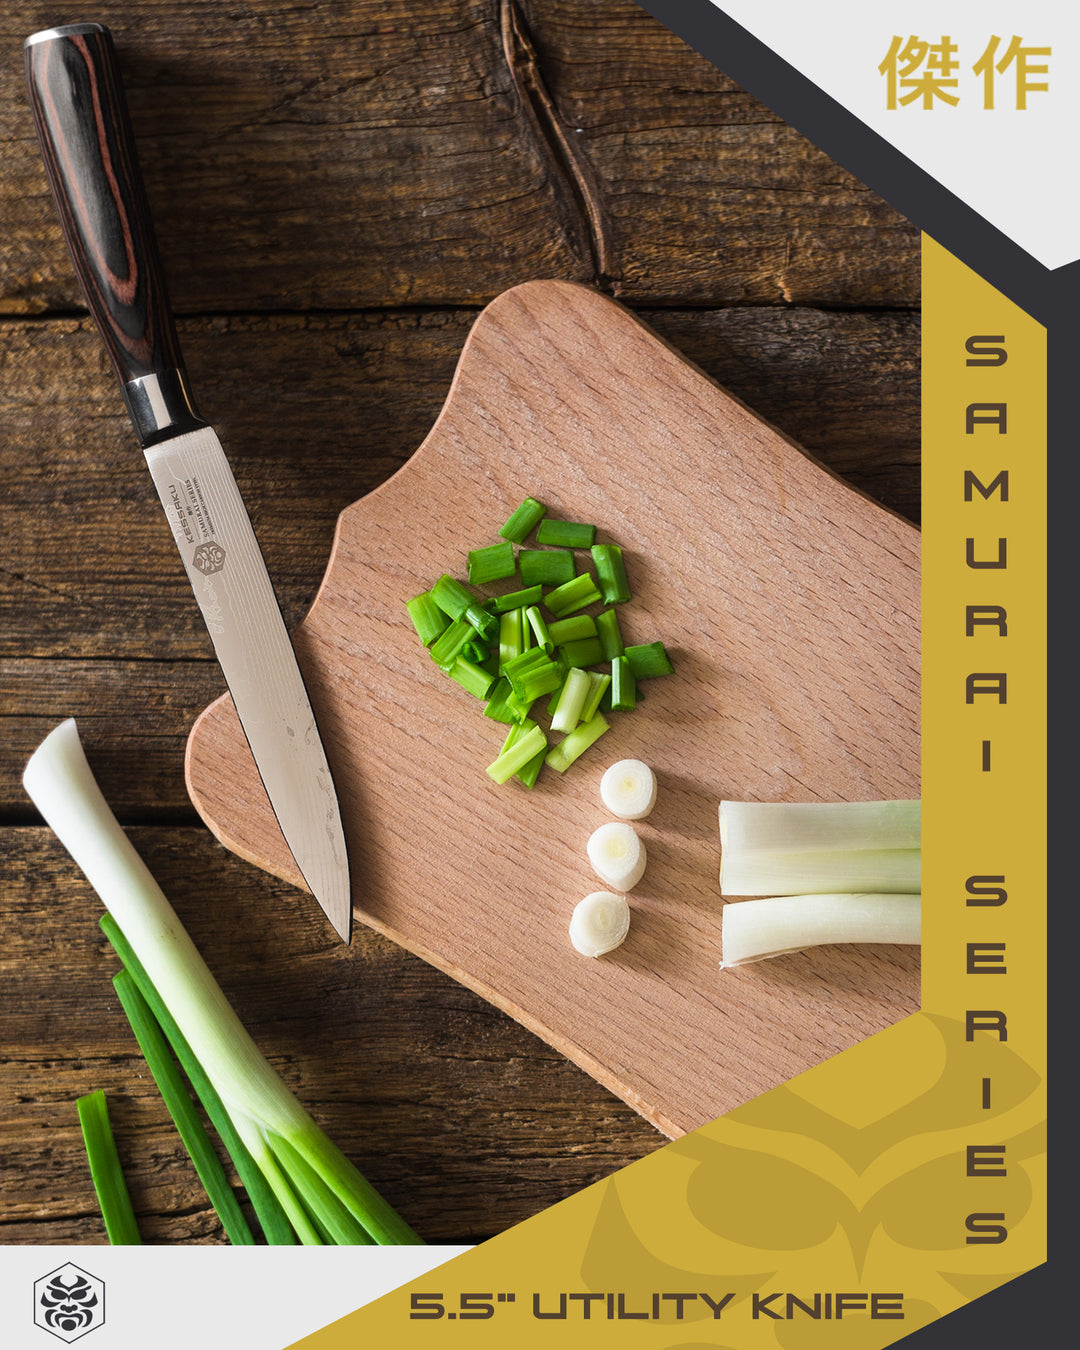 The Samurai Utility Knife is used to chop green onion